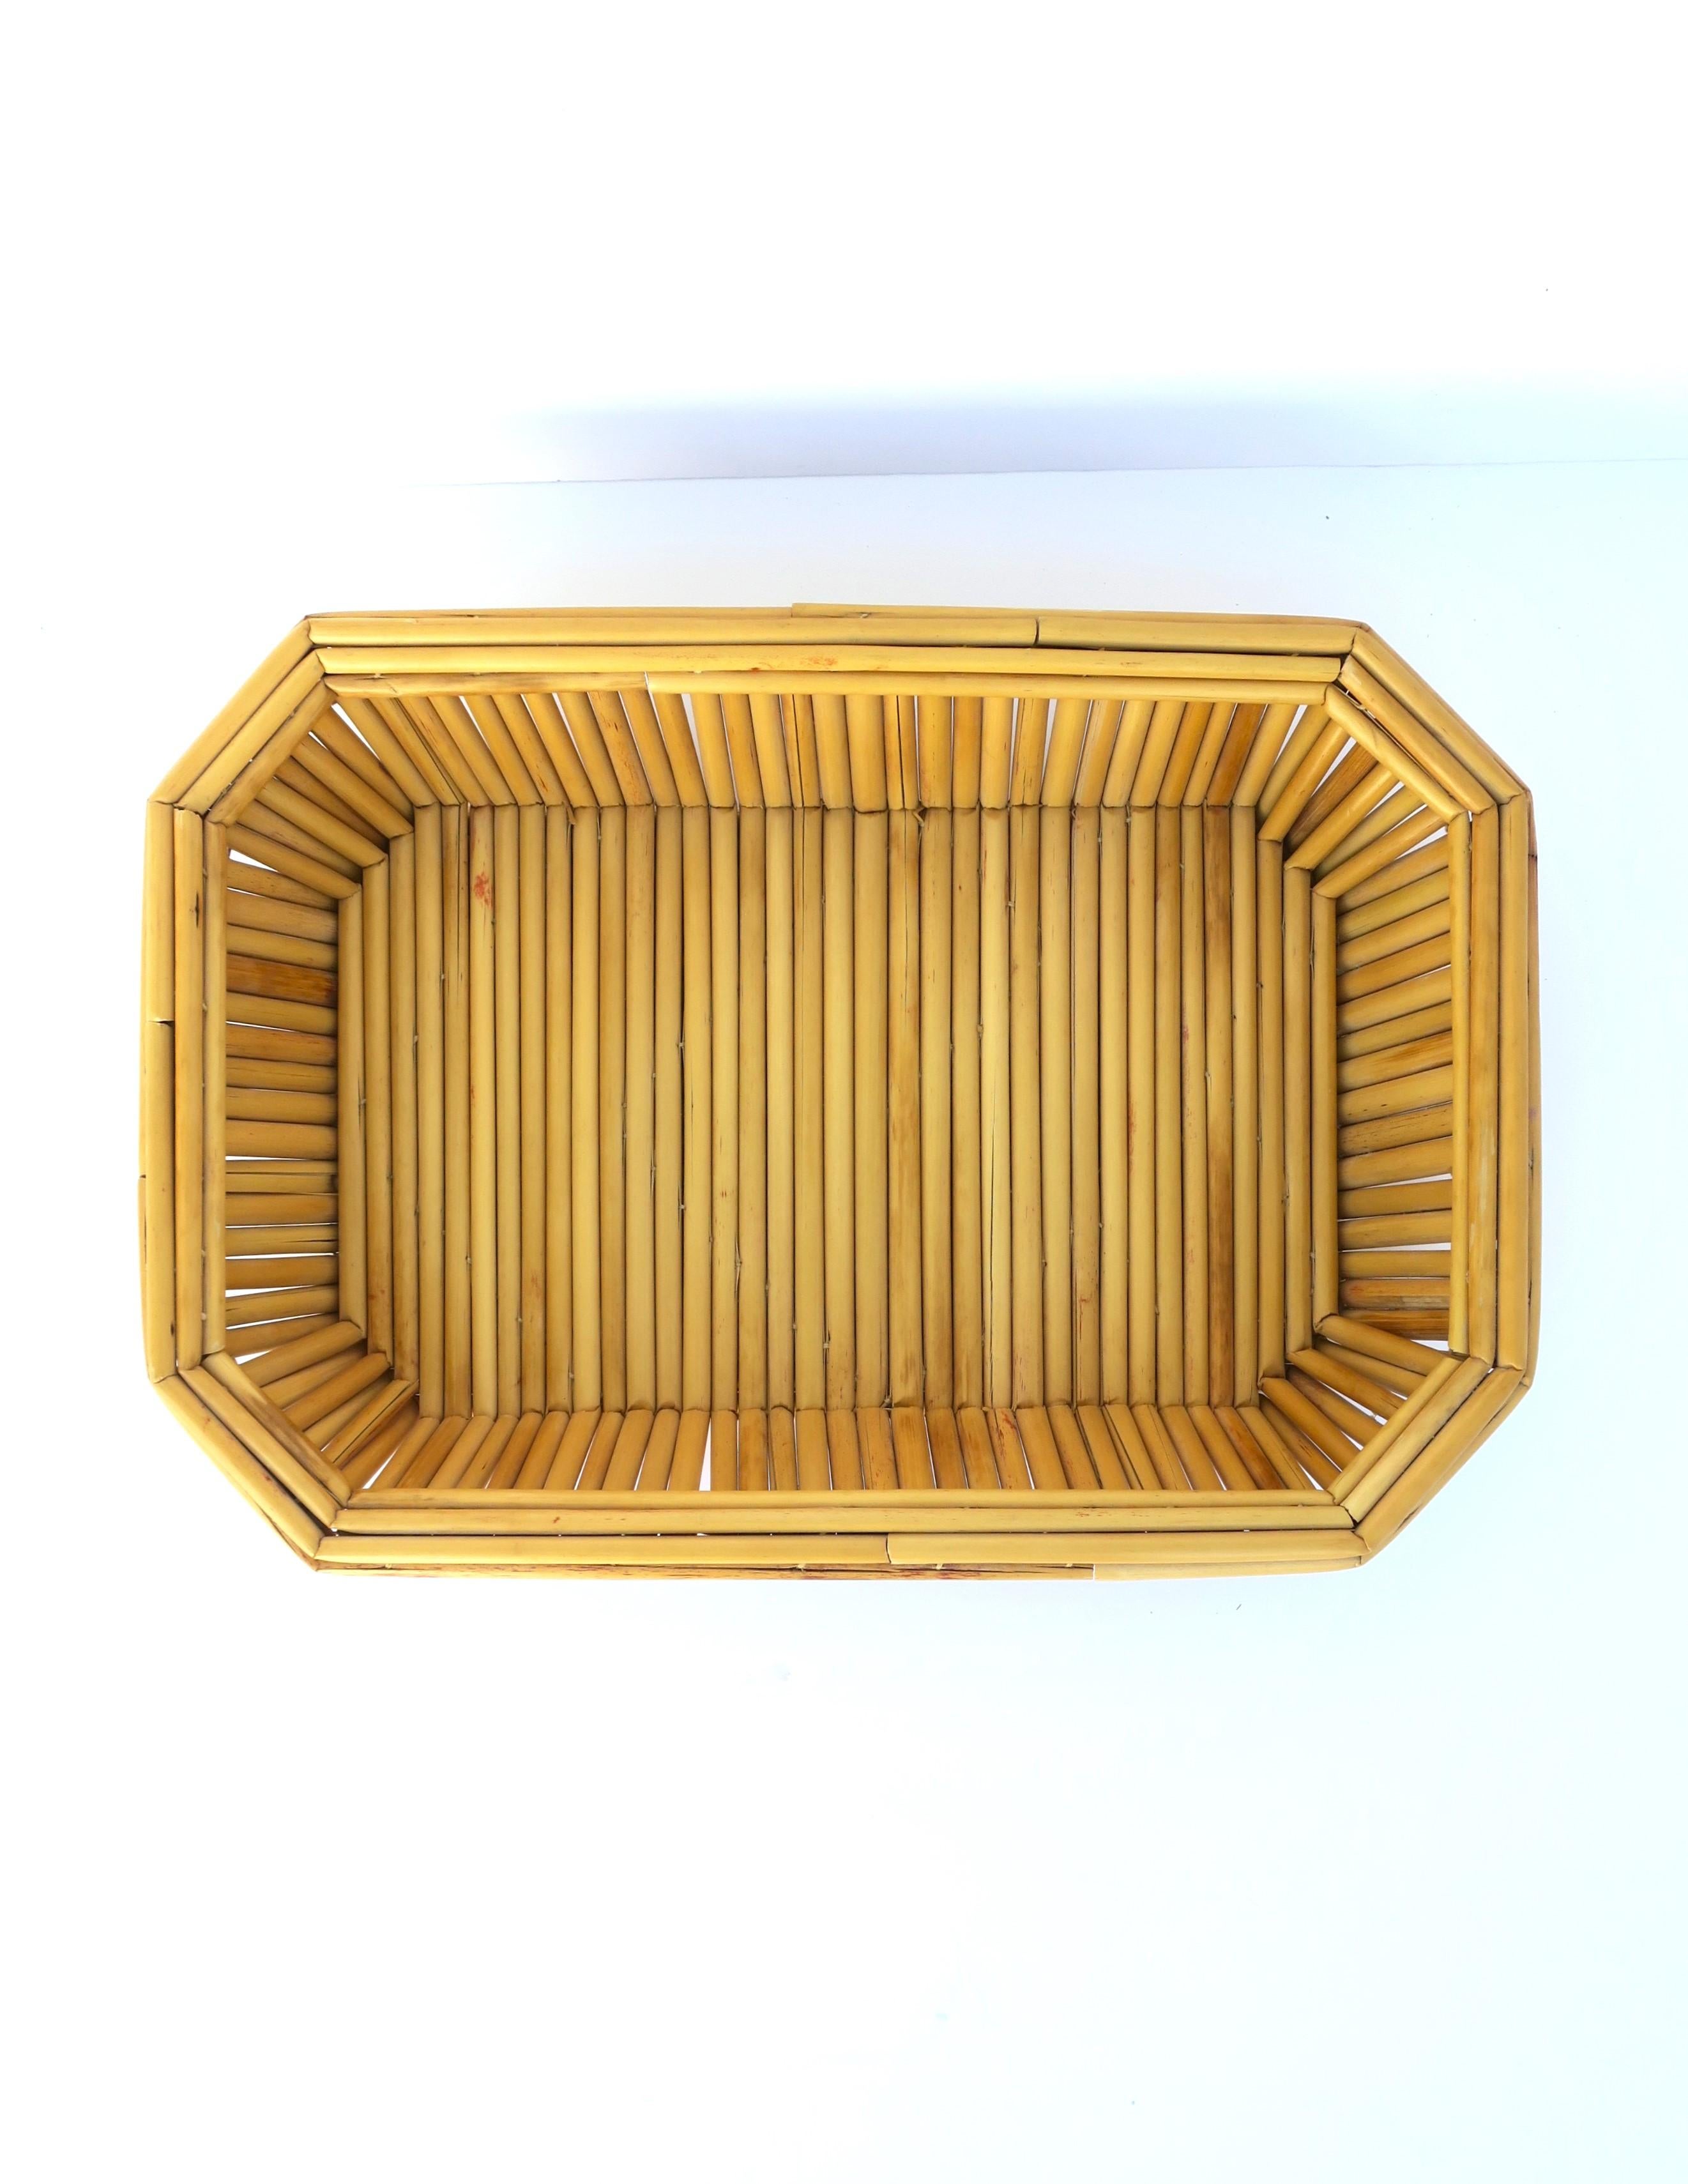 A lightweight wicker tray with an octagonal shape, circa mid to late-20th century. Tray is rectangular/octagonal. Great to use/display fruits, vegetables, seashells, etc. Dimensions: 3.25